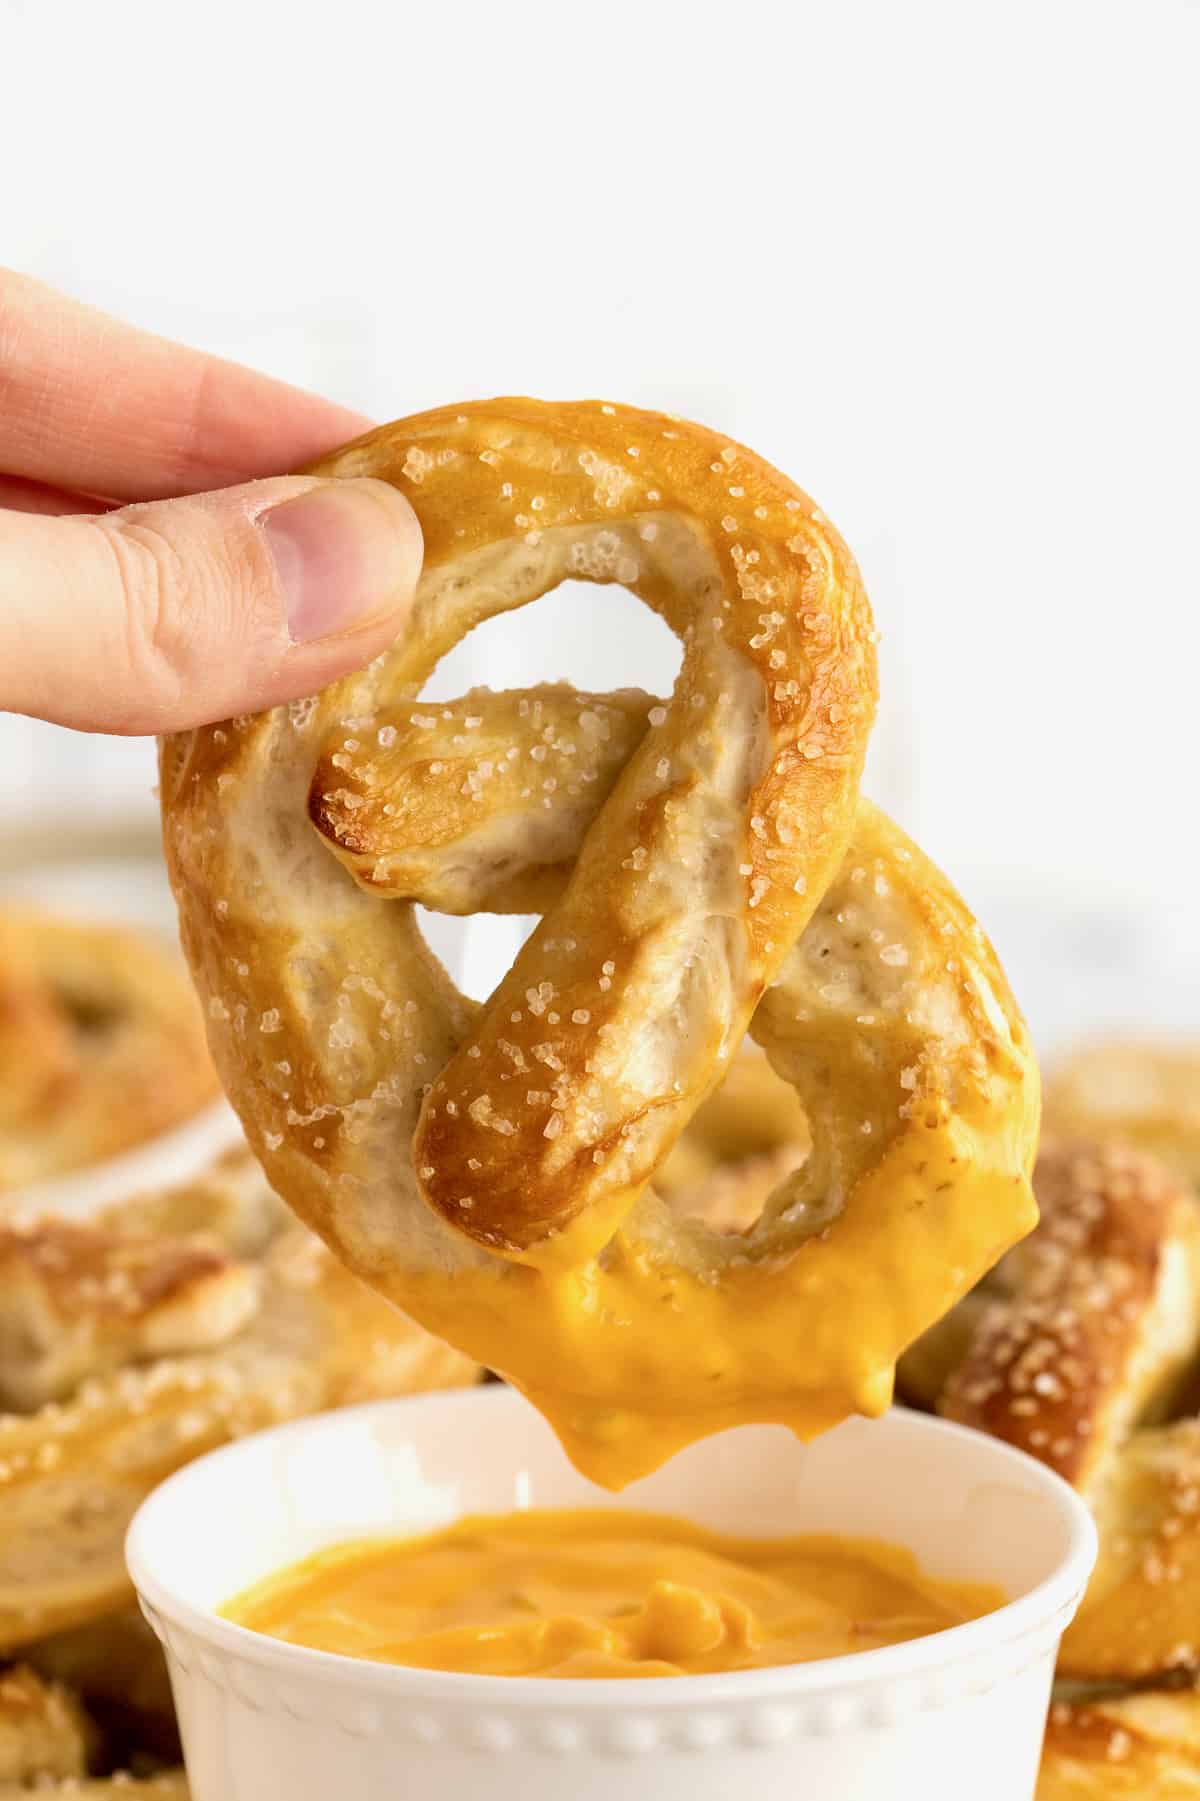 A hand holding a pretzel that has just been dipped in cheese sauce. A plate full of soft pretzels with a small dish of cheese sauce is in the background.